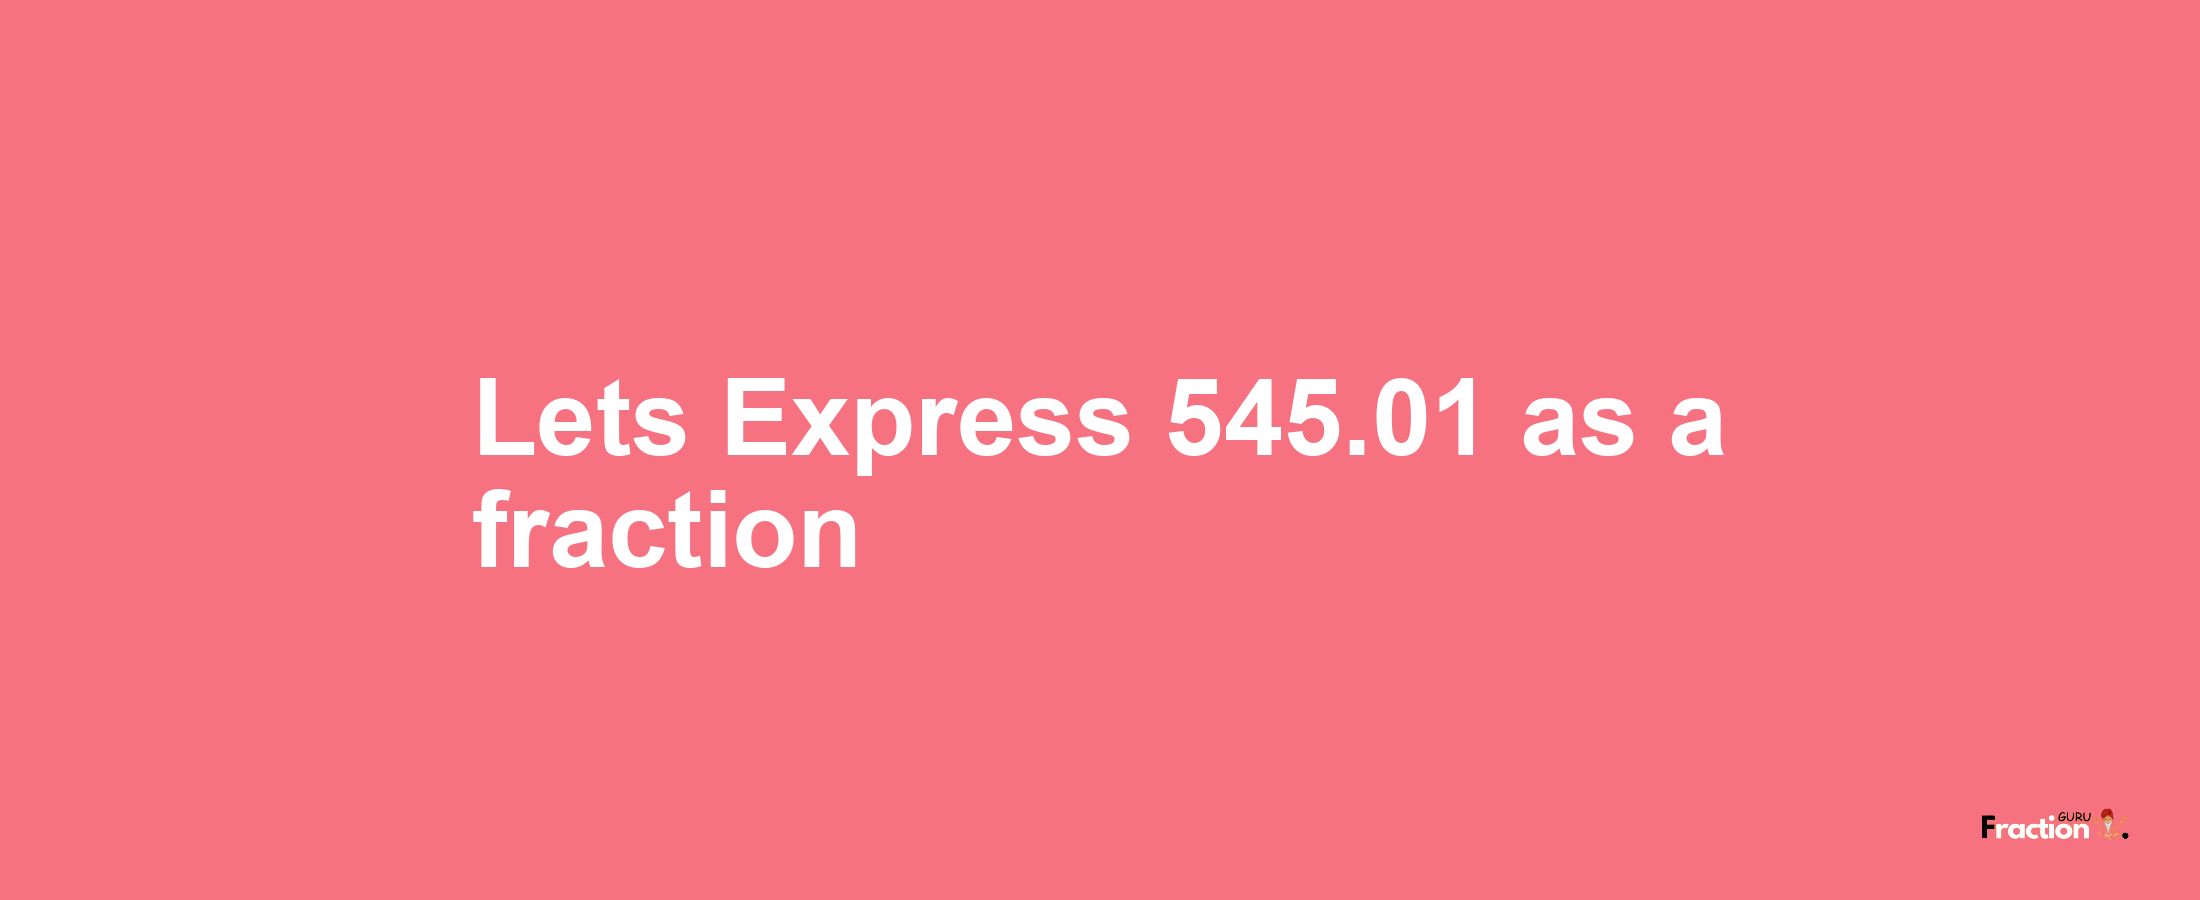 Lets Express 545.01 as afraction